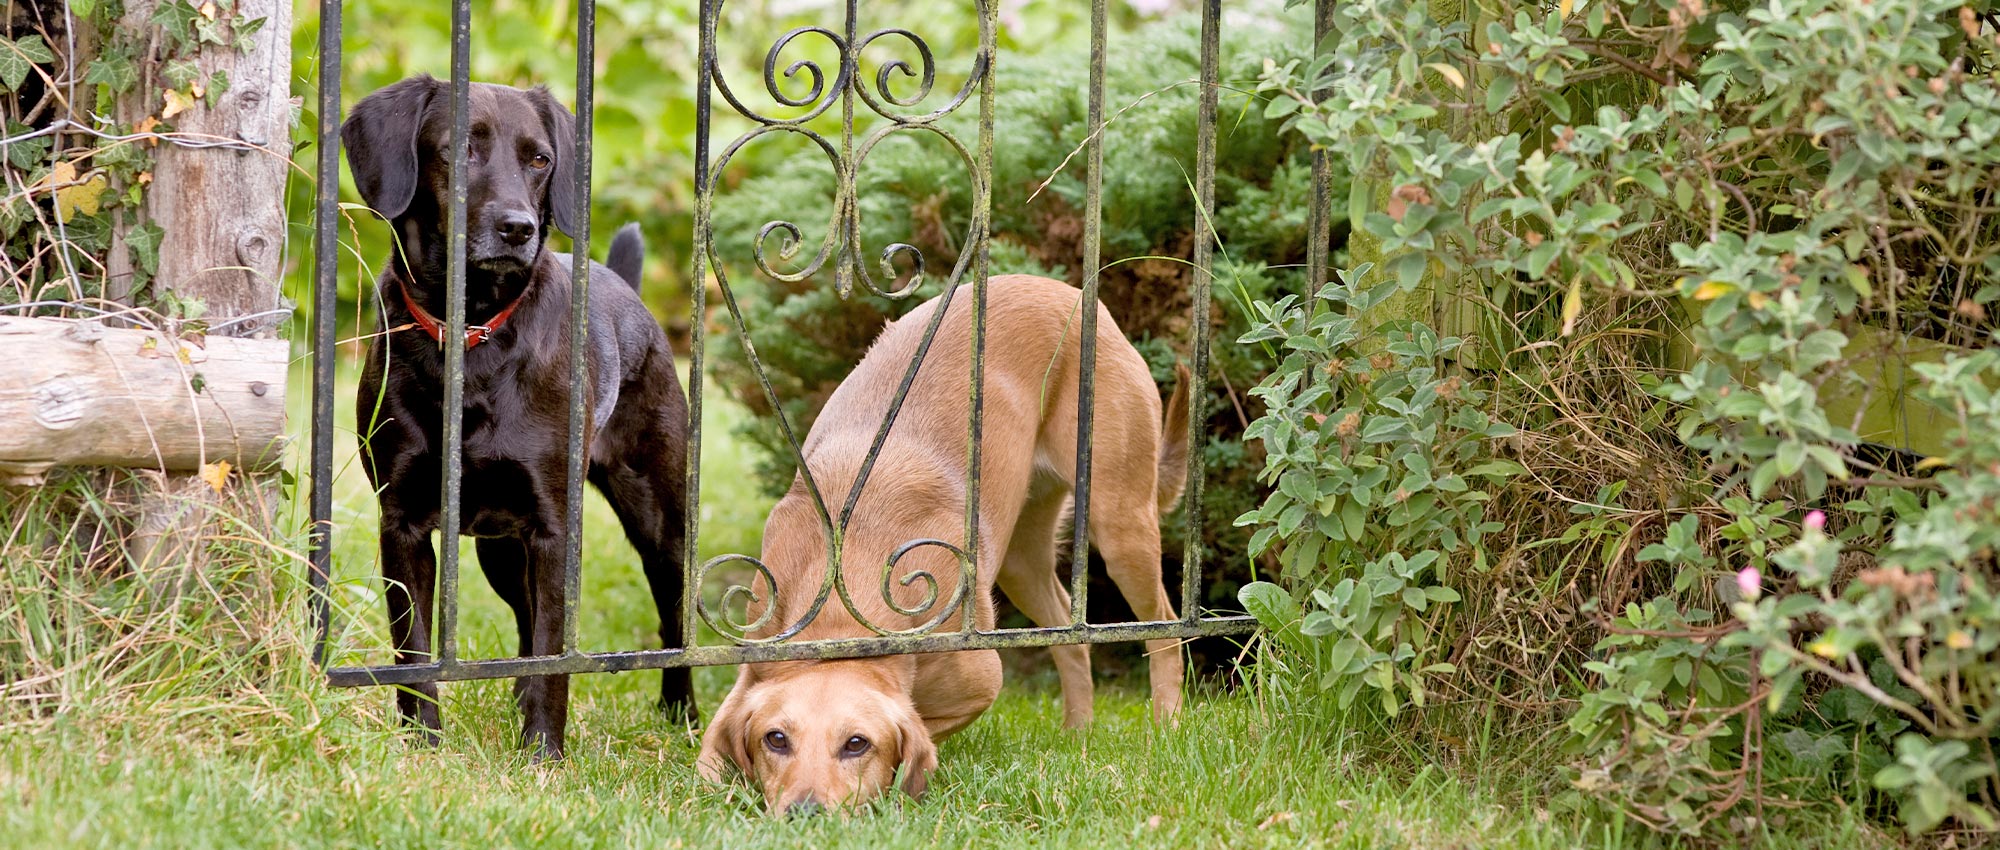 How to keep your dog from escaping | The Humane Society of the United States